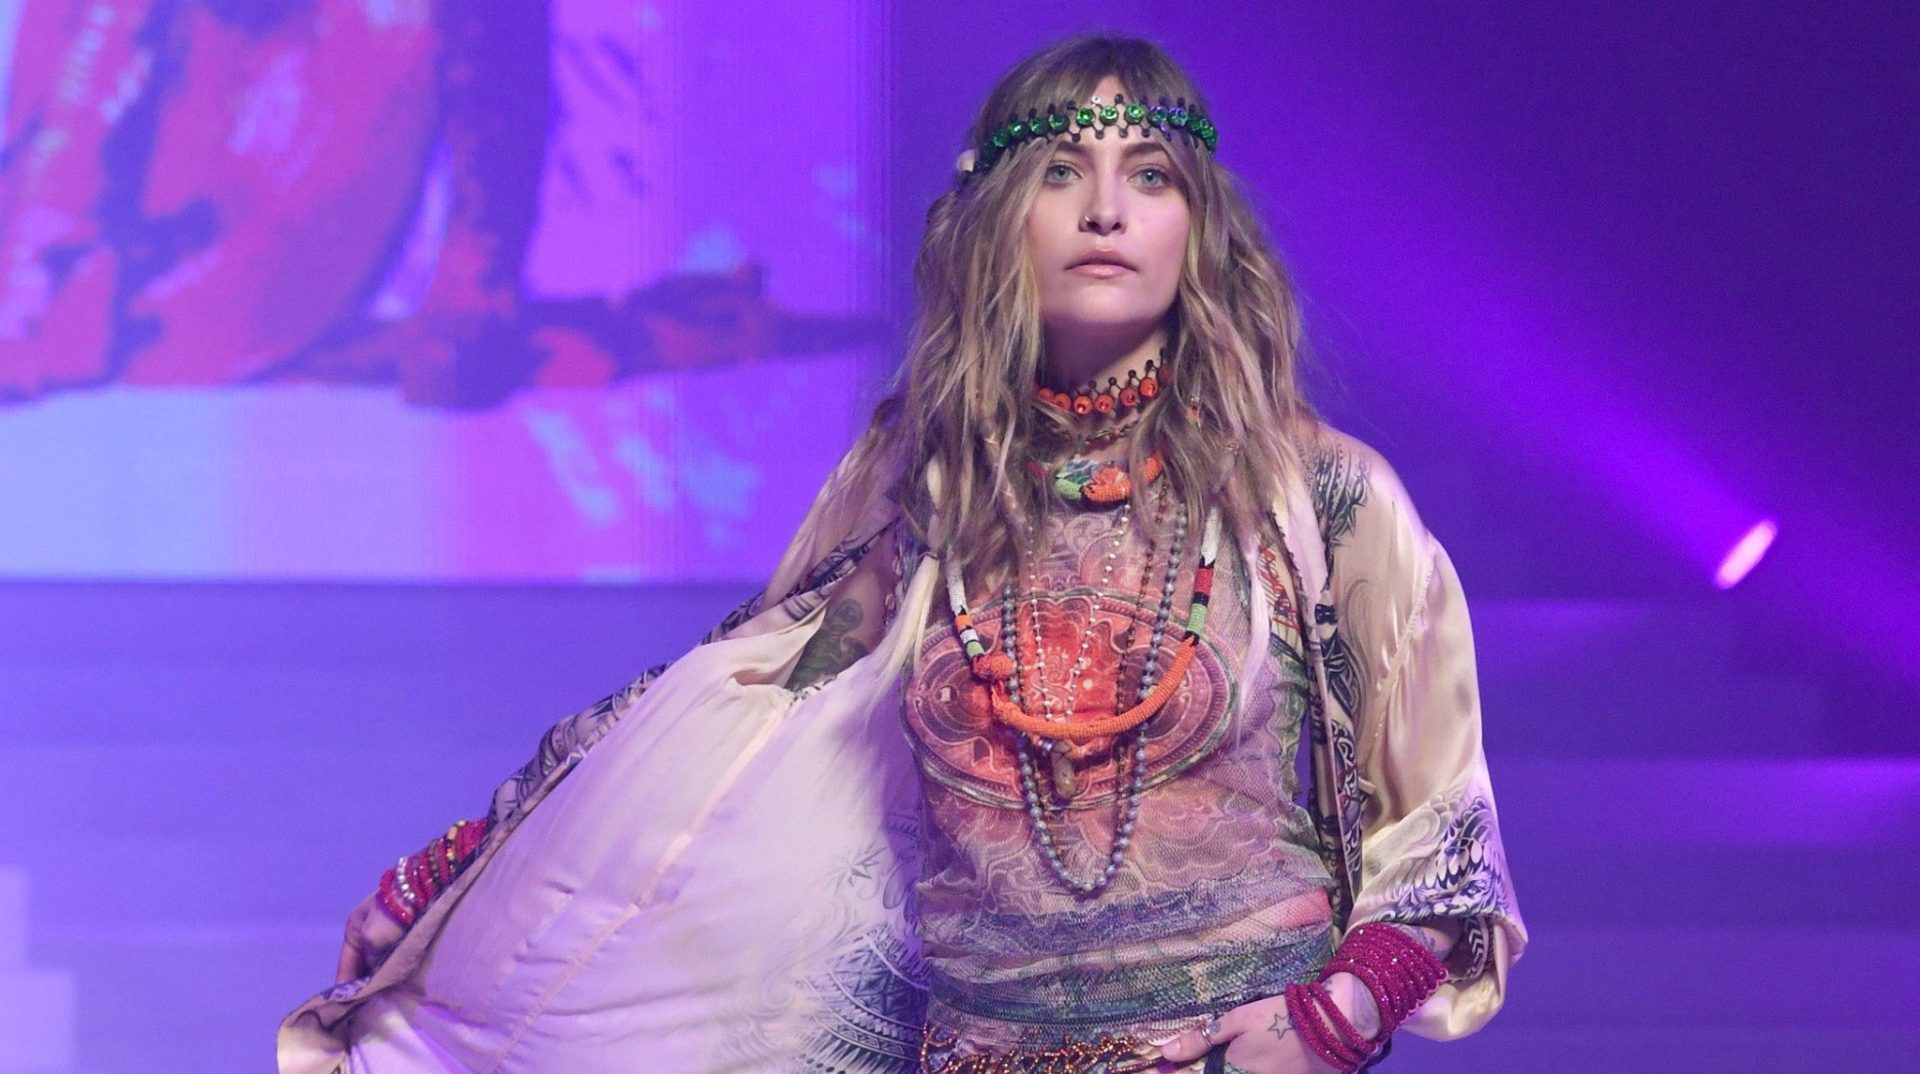 Paris Jackson says Michael Jackson fans have told her to 'kill myself' (video)